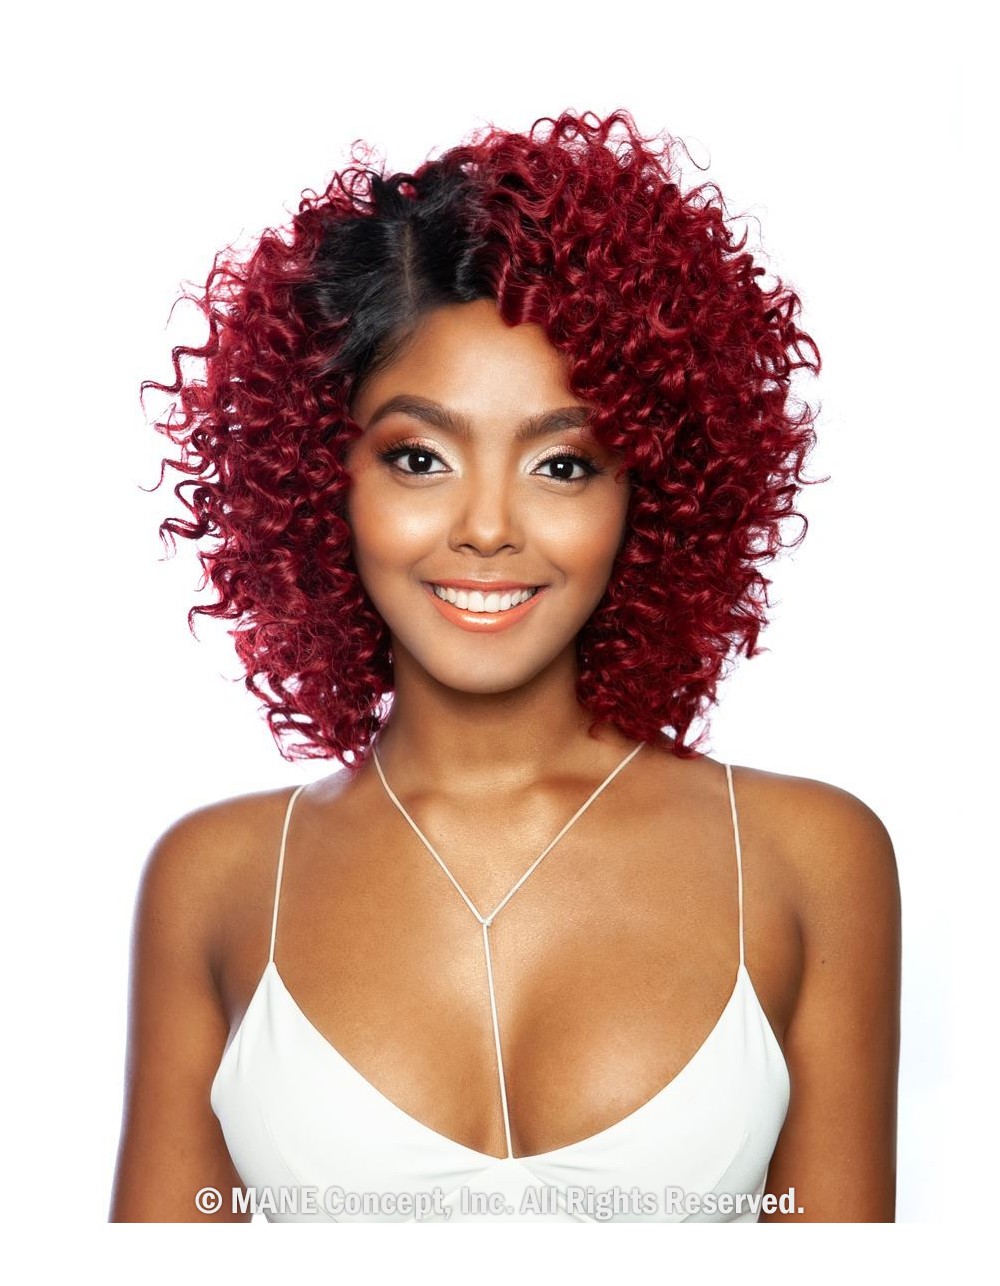 6_SmoothStyle_DryHairMode_Curly-Hair_1x1.png